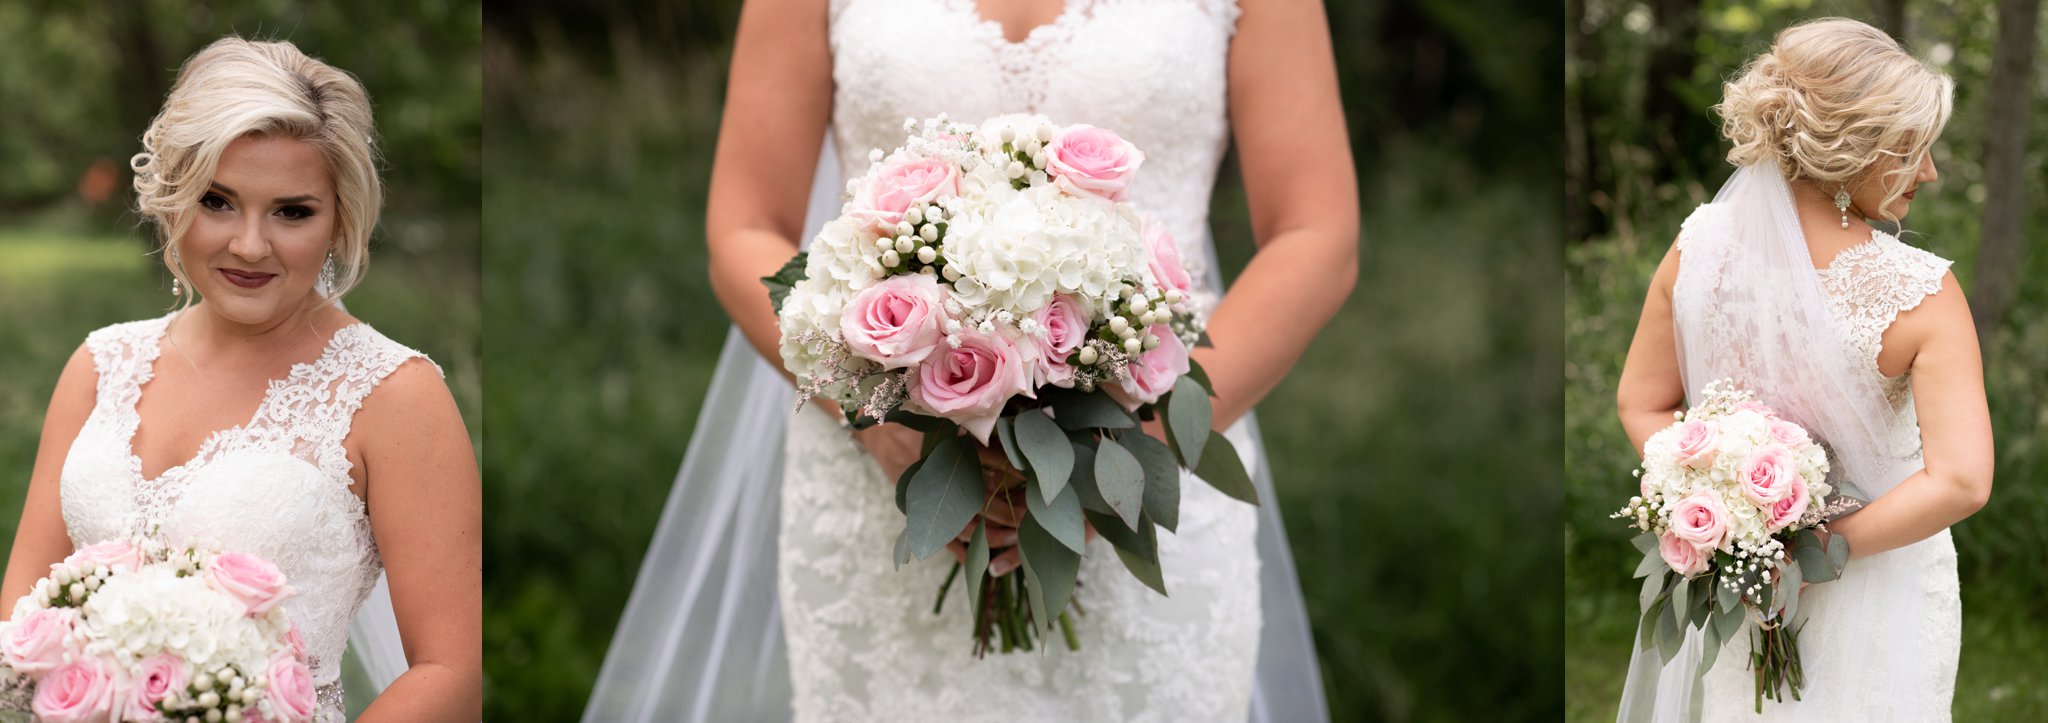 pink roses with white hydrangeas and baby’s breath bridal bouquet bride portraits